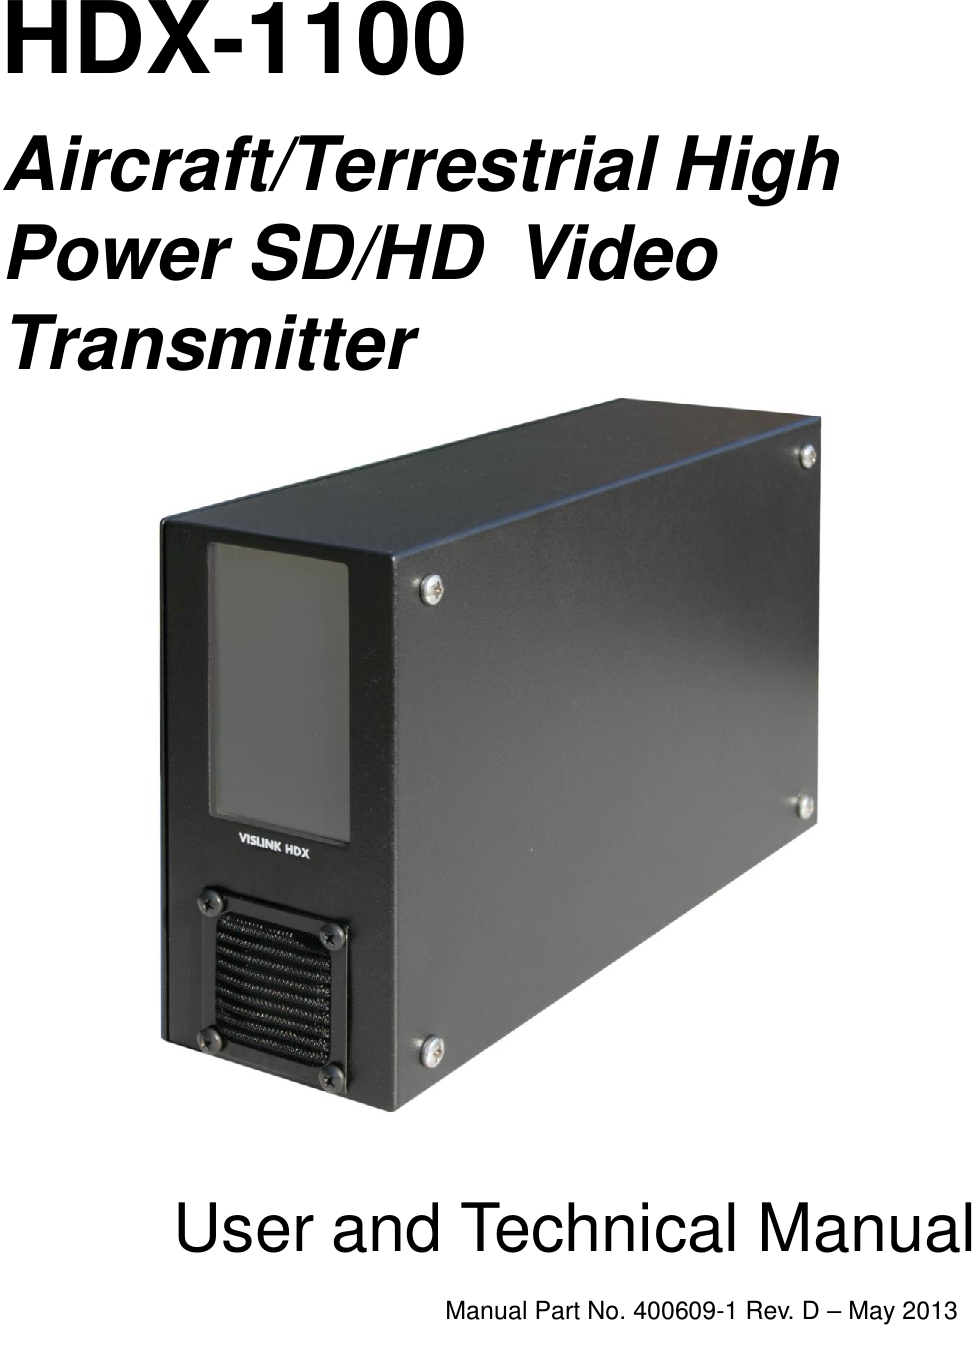  HDX-1100  Aircraft/Terrestrial High Power SD/HD  Video Transmitter                                       User and Technical Manual  Manual Part No. 400609-1 Rev. D – May 2013     